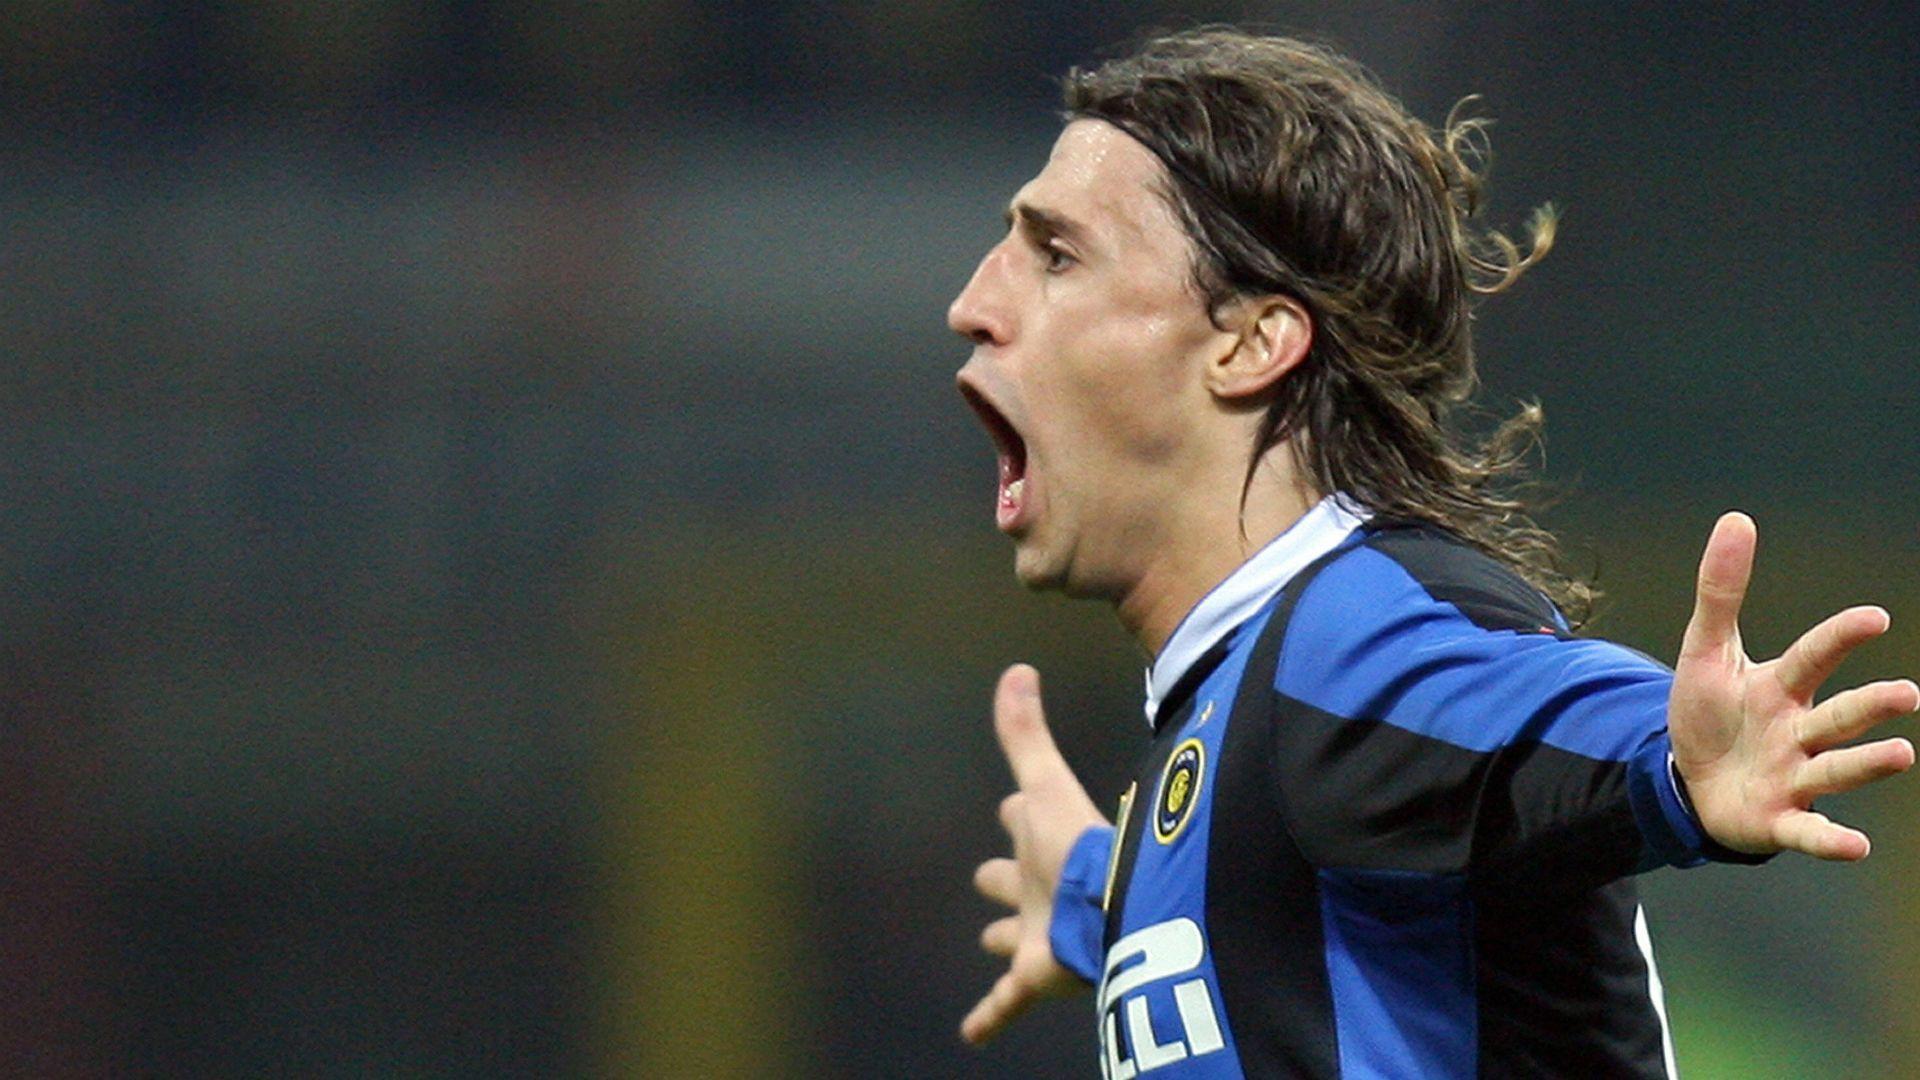 Hernan Crespo: Juventus could keep winning for many years